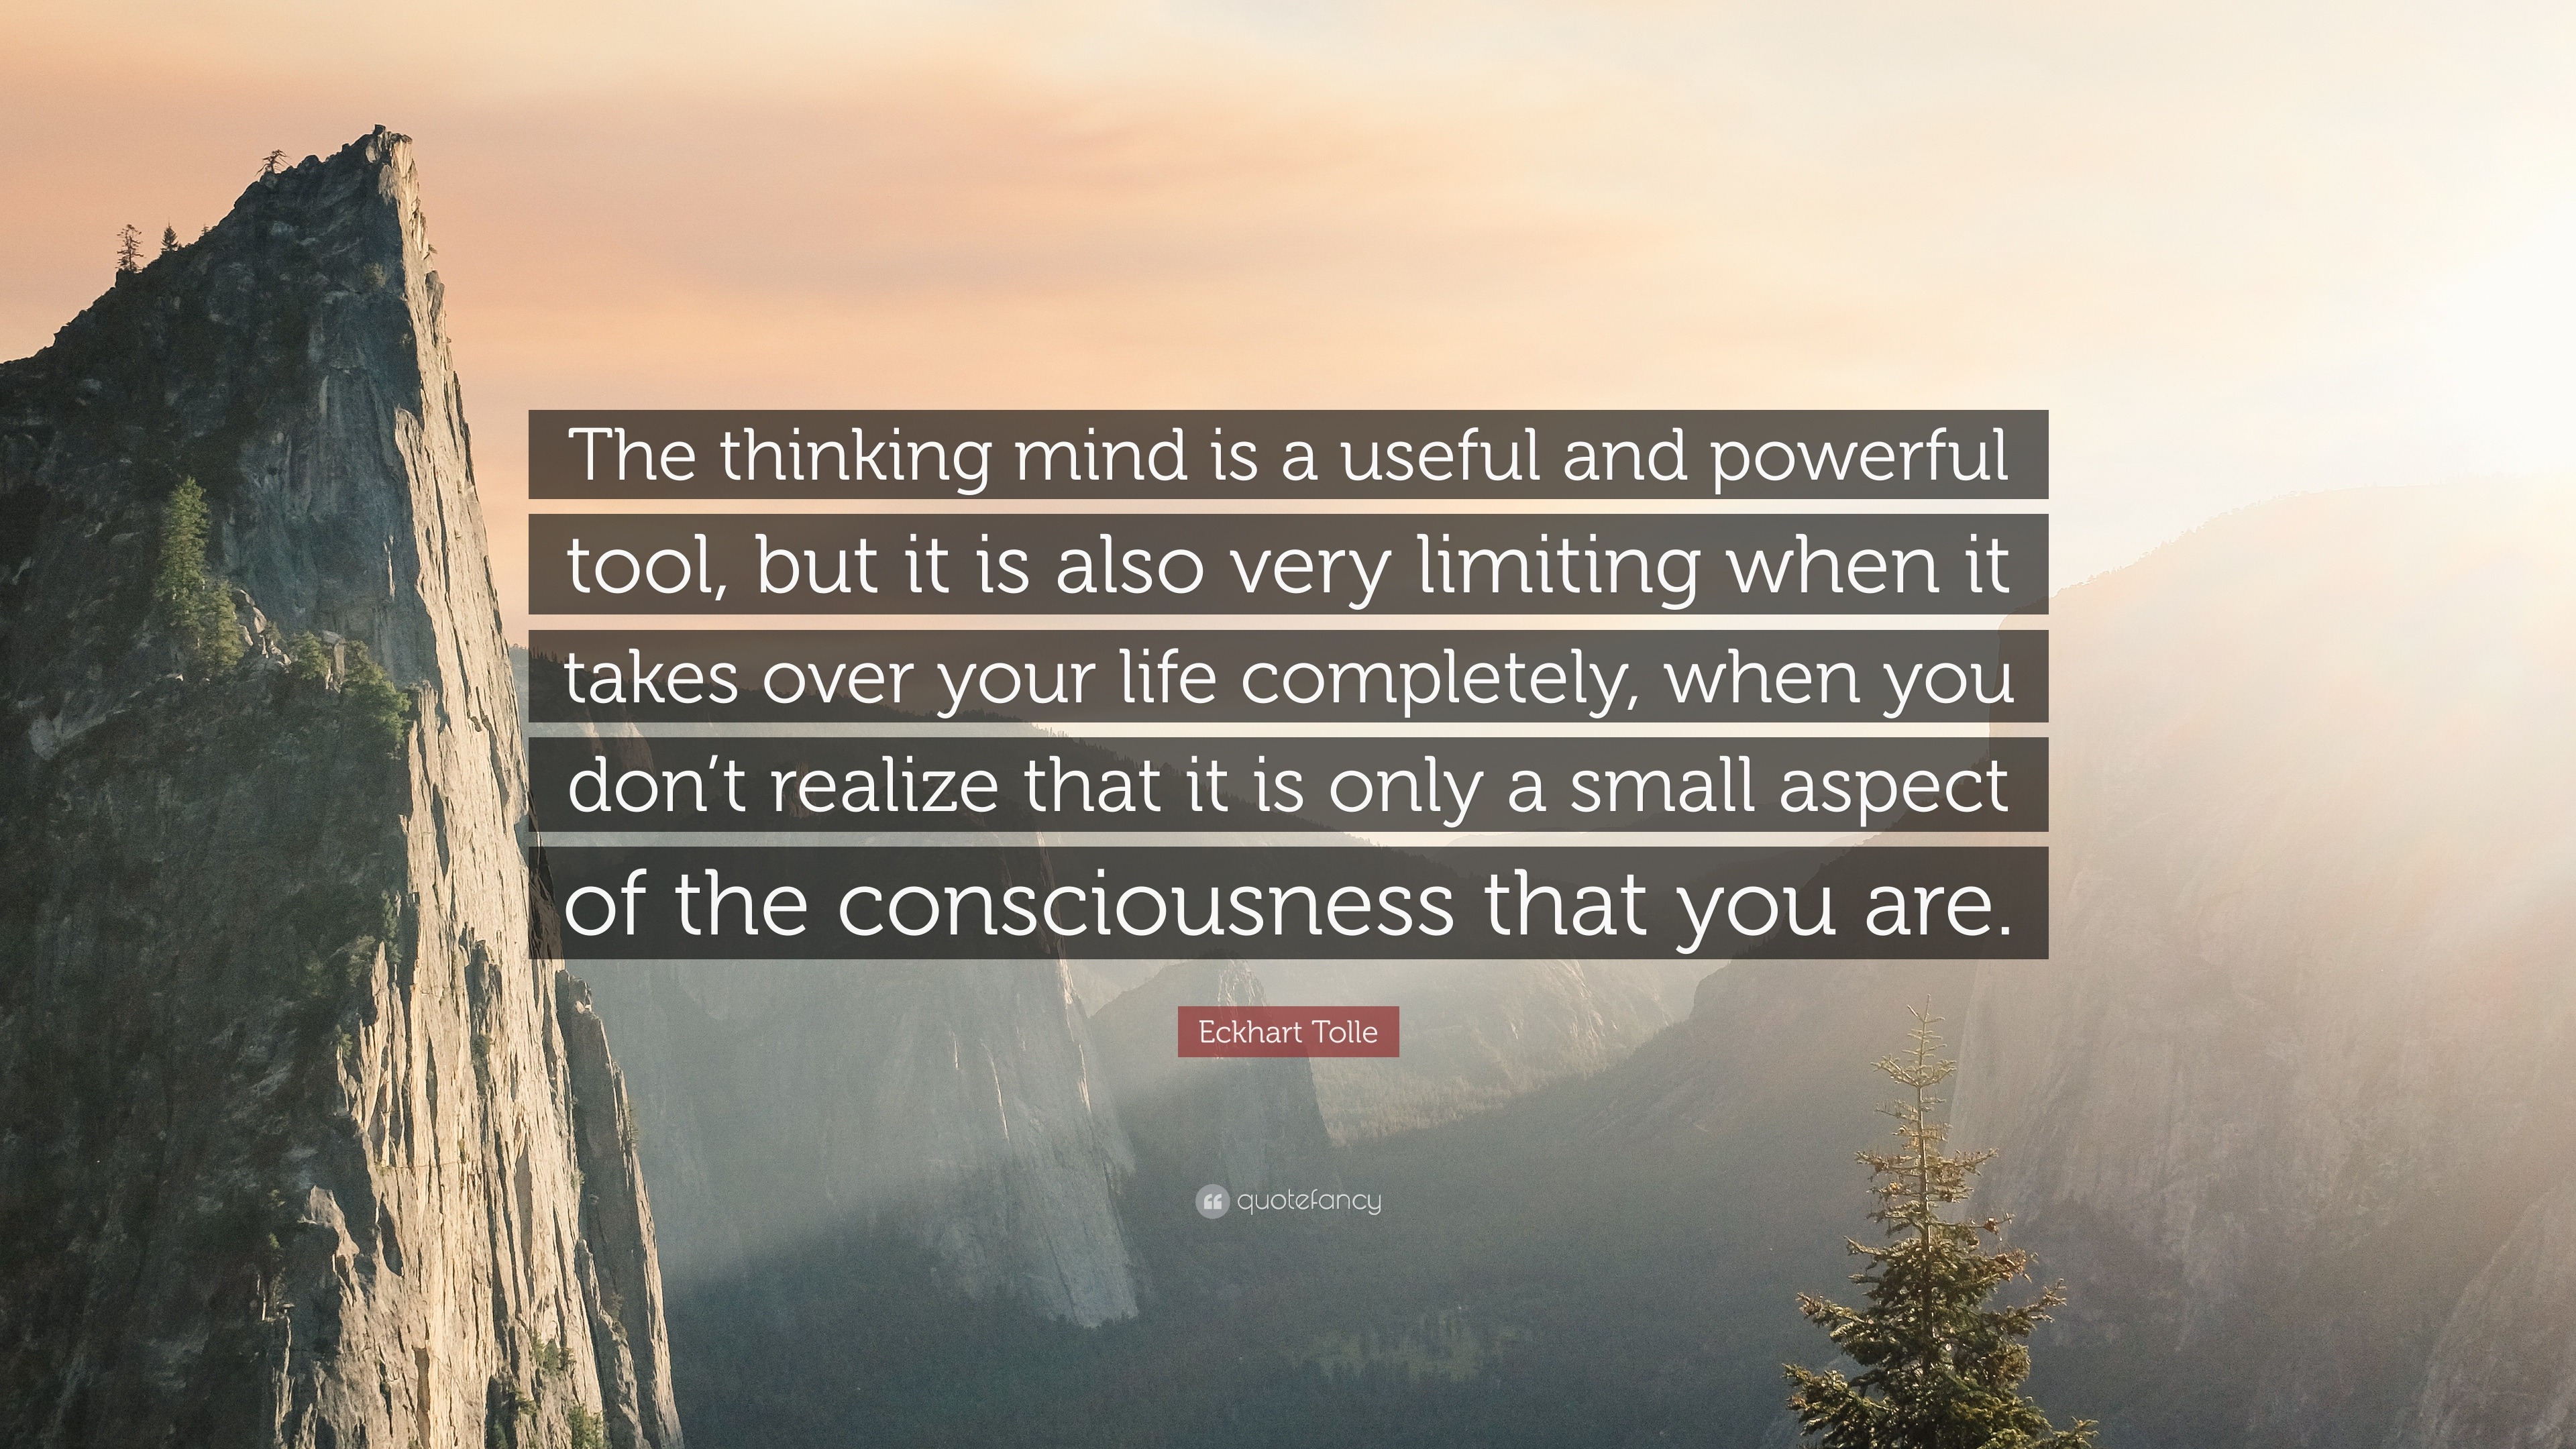 The mind is a powerful tool